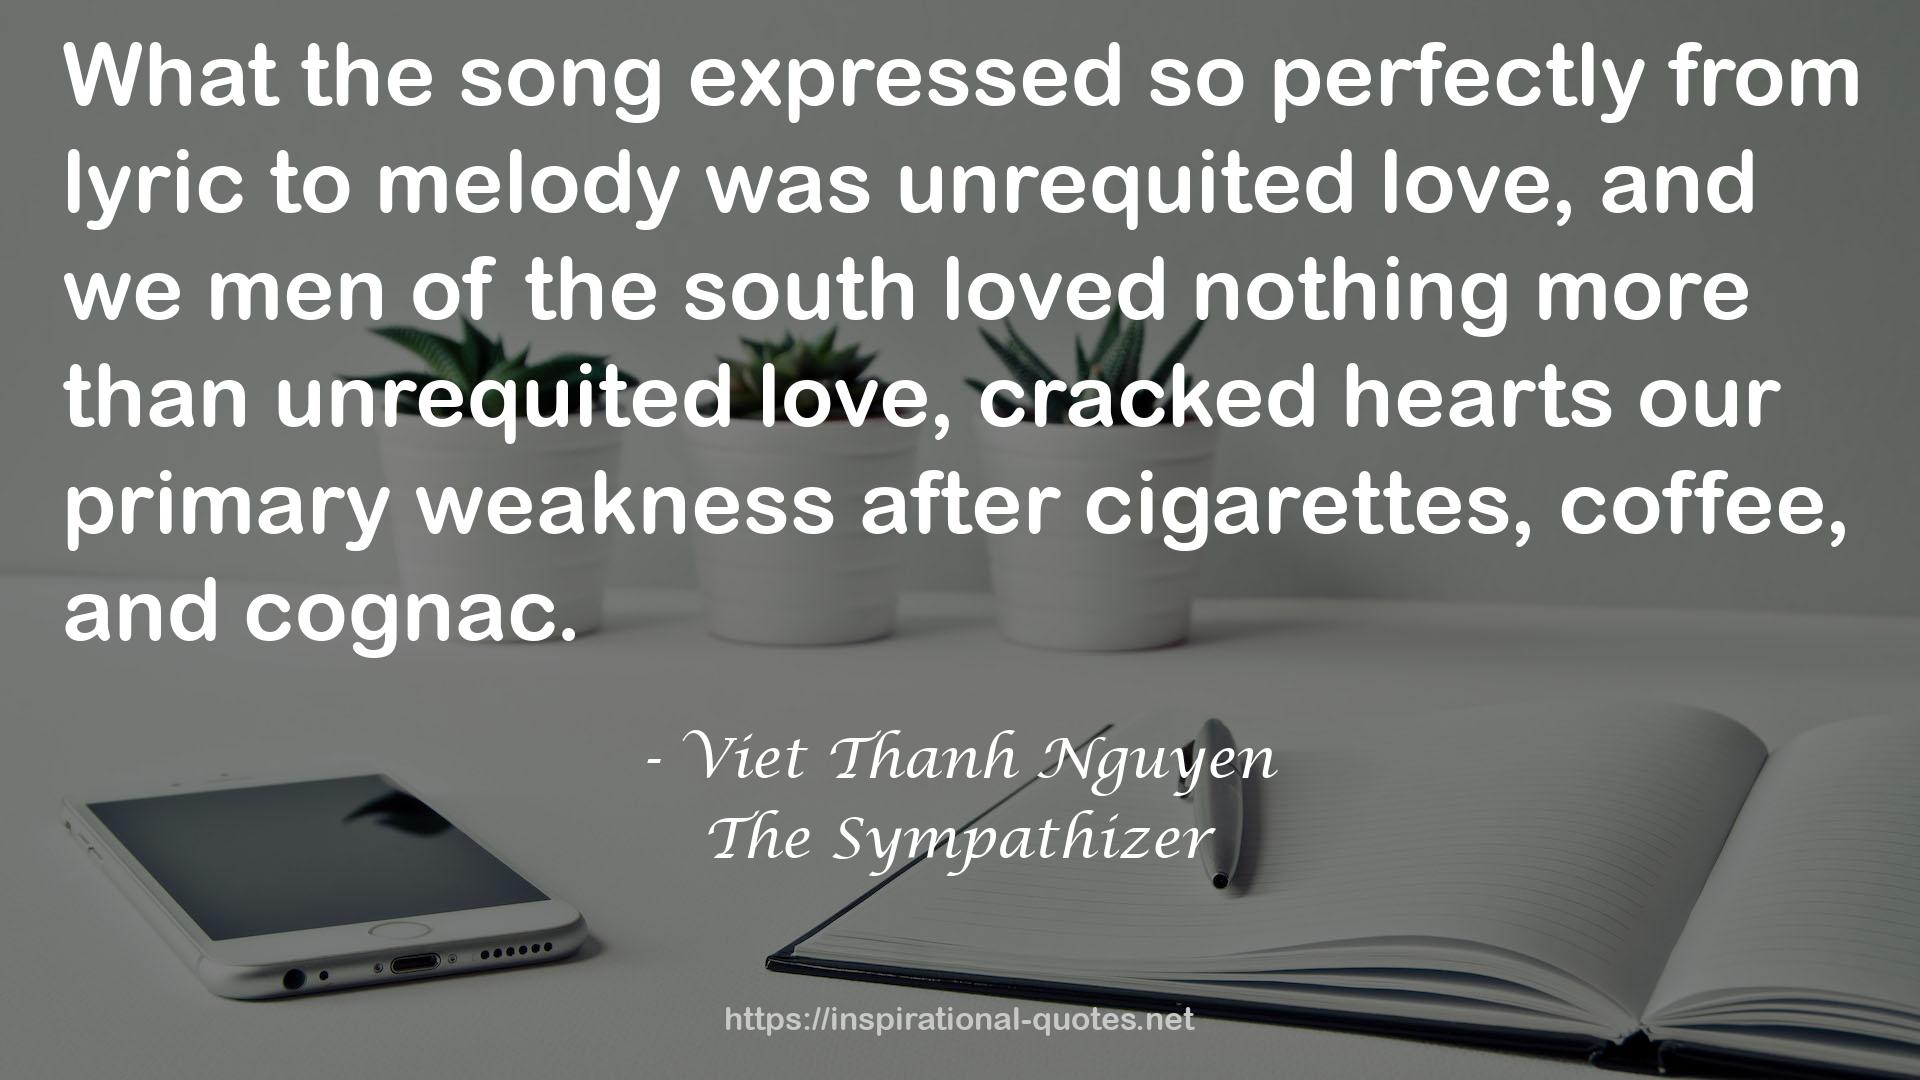 Viet Thanh Nguyen QUOTES